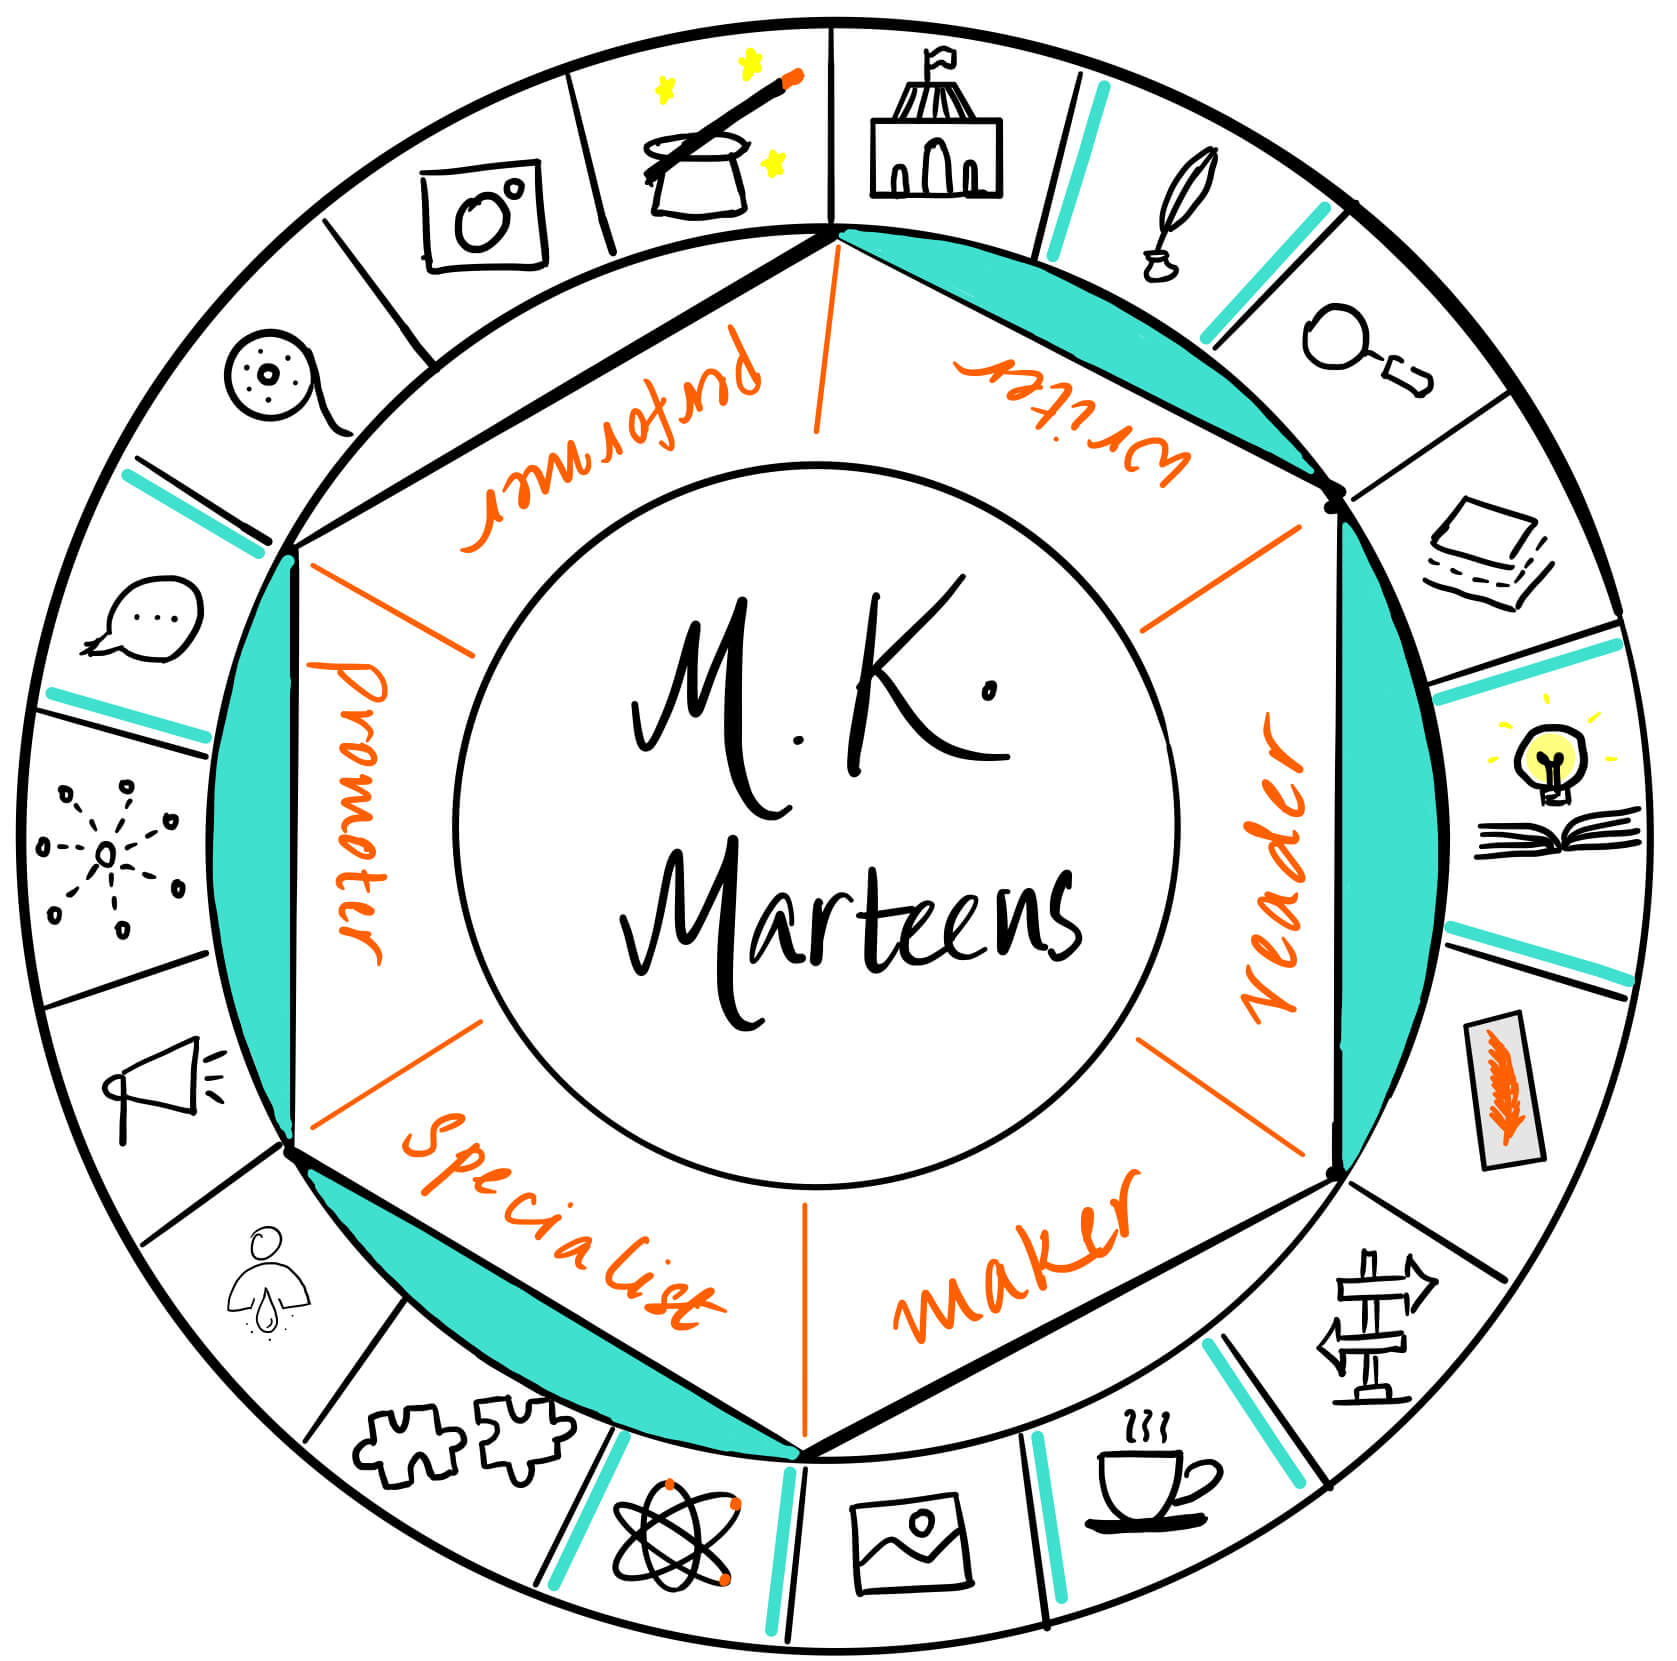 M. K. Marteens is a writer, reader, promoter and specialist. It's a pleasure to have her over on The Creator's Roulette to talk about  finding reliable resources.